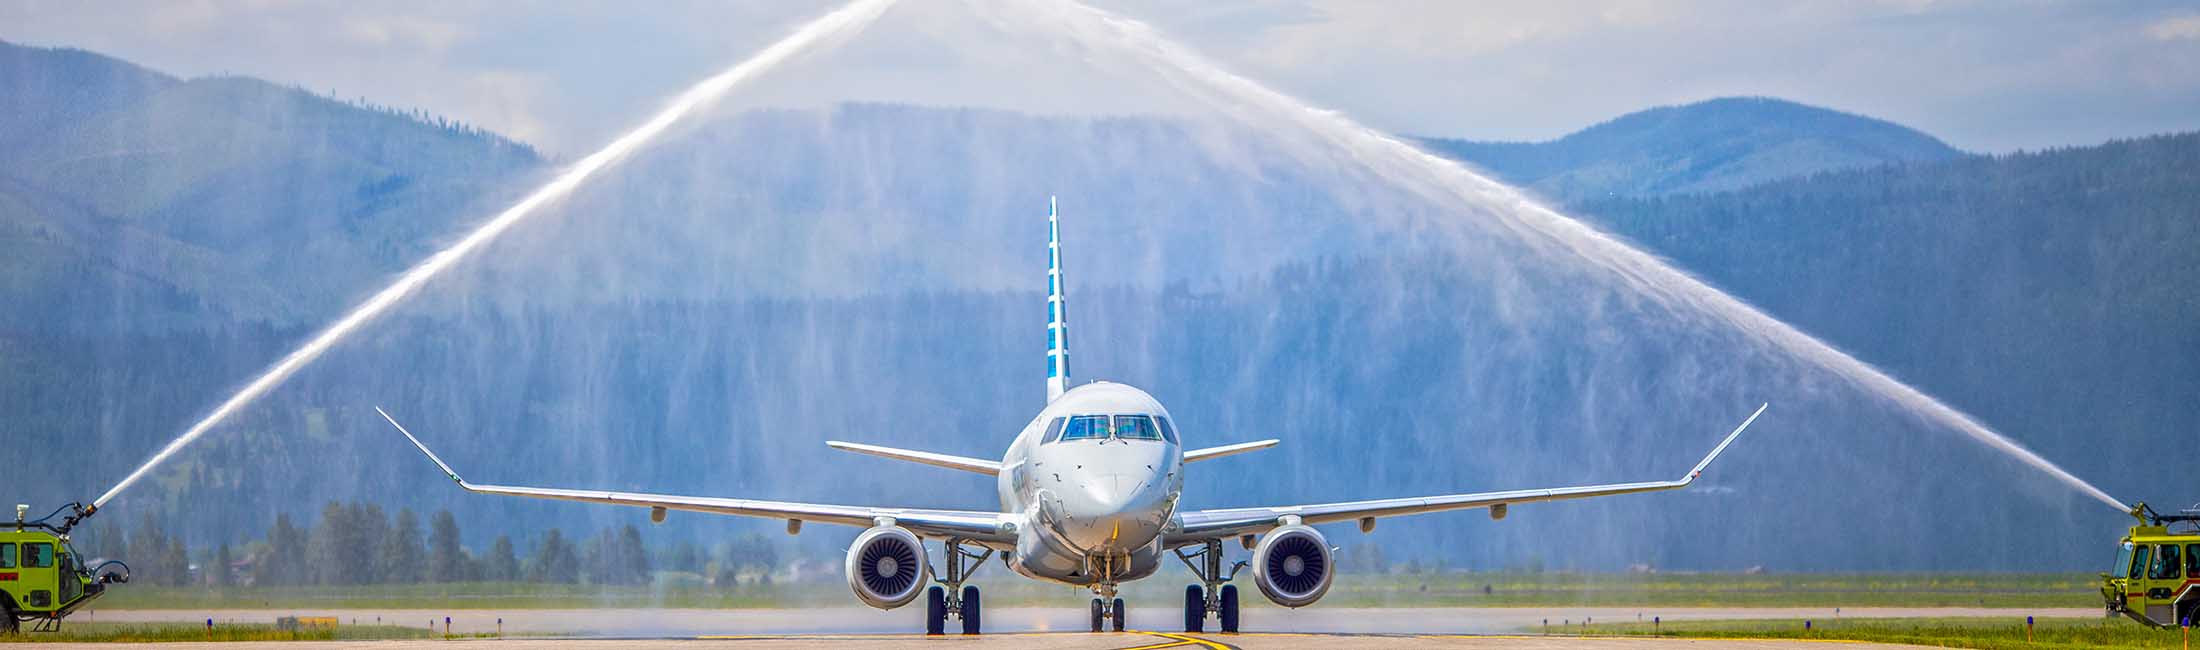 FYI Before You Fly: Missoula International Airport FAQs